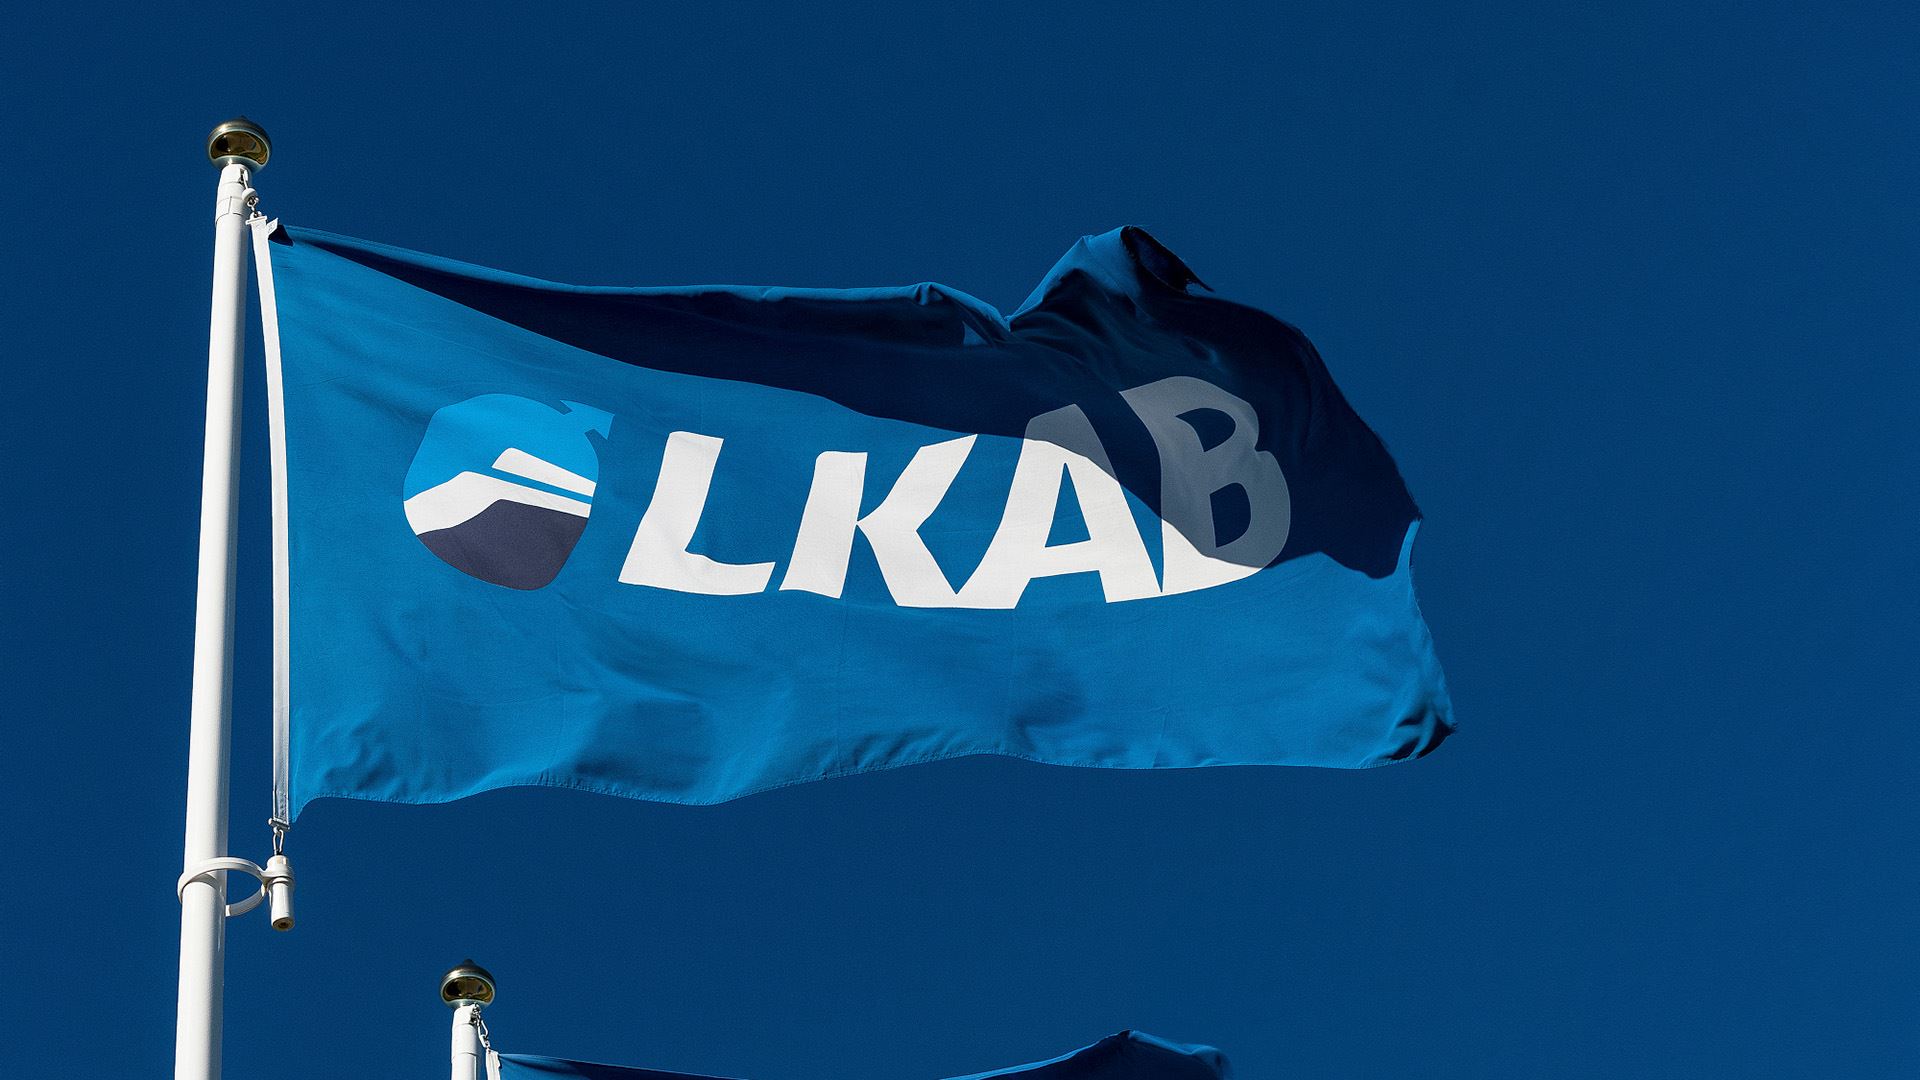 Swedish miner LKAB invests heavily in carbon-free production 